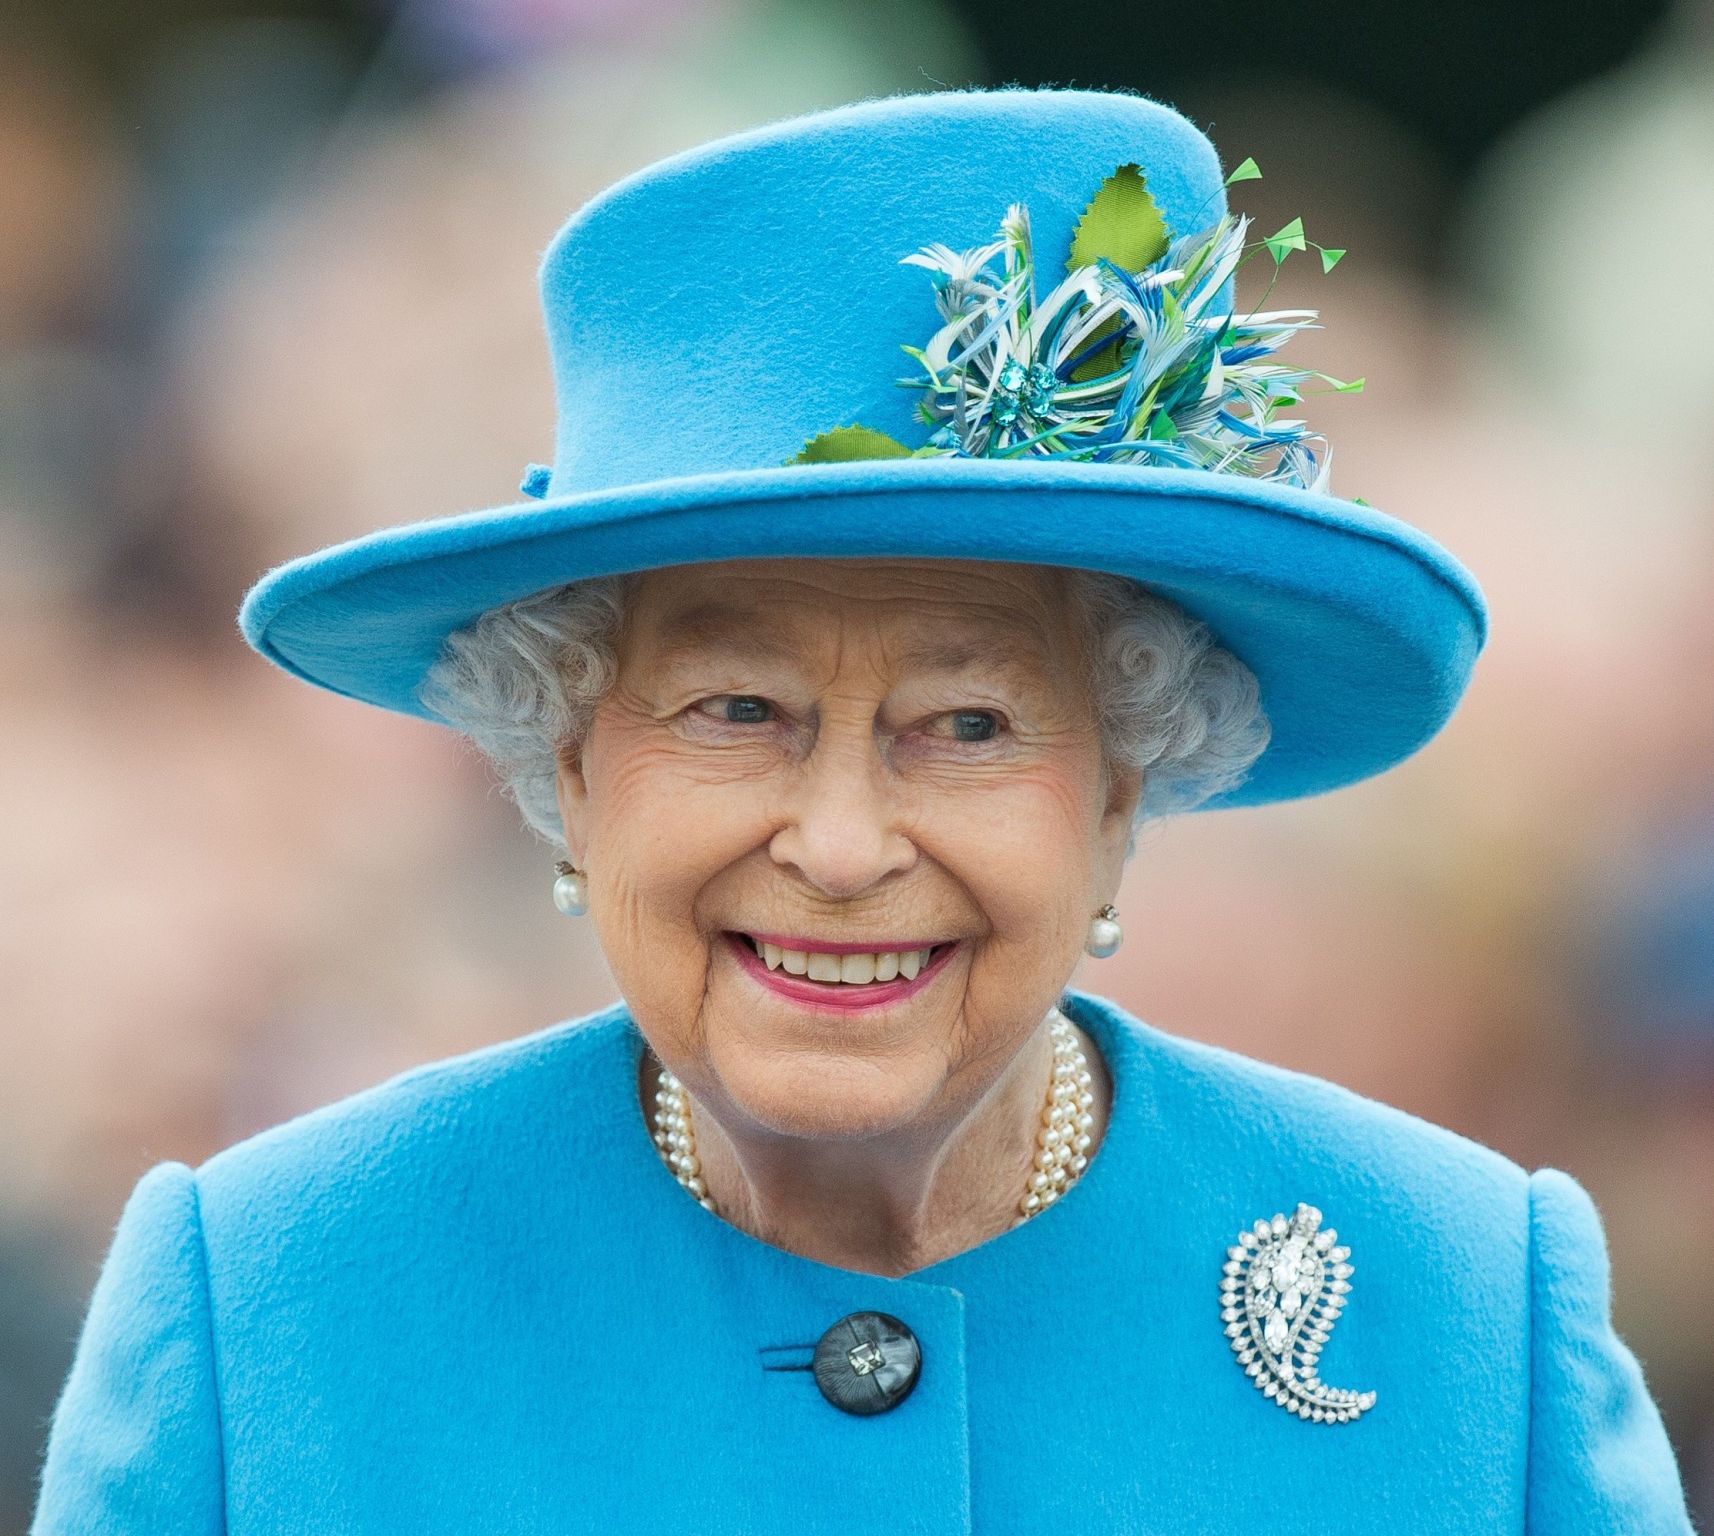 8 leadership lessons from The Queen